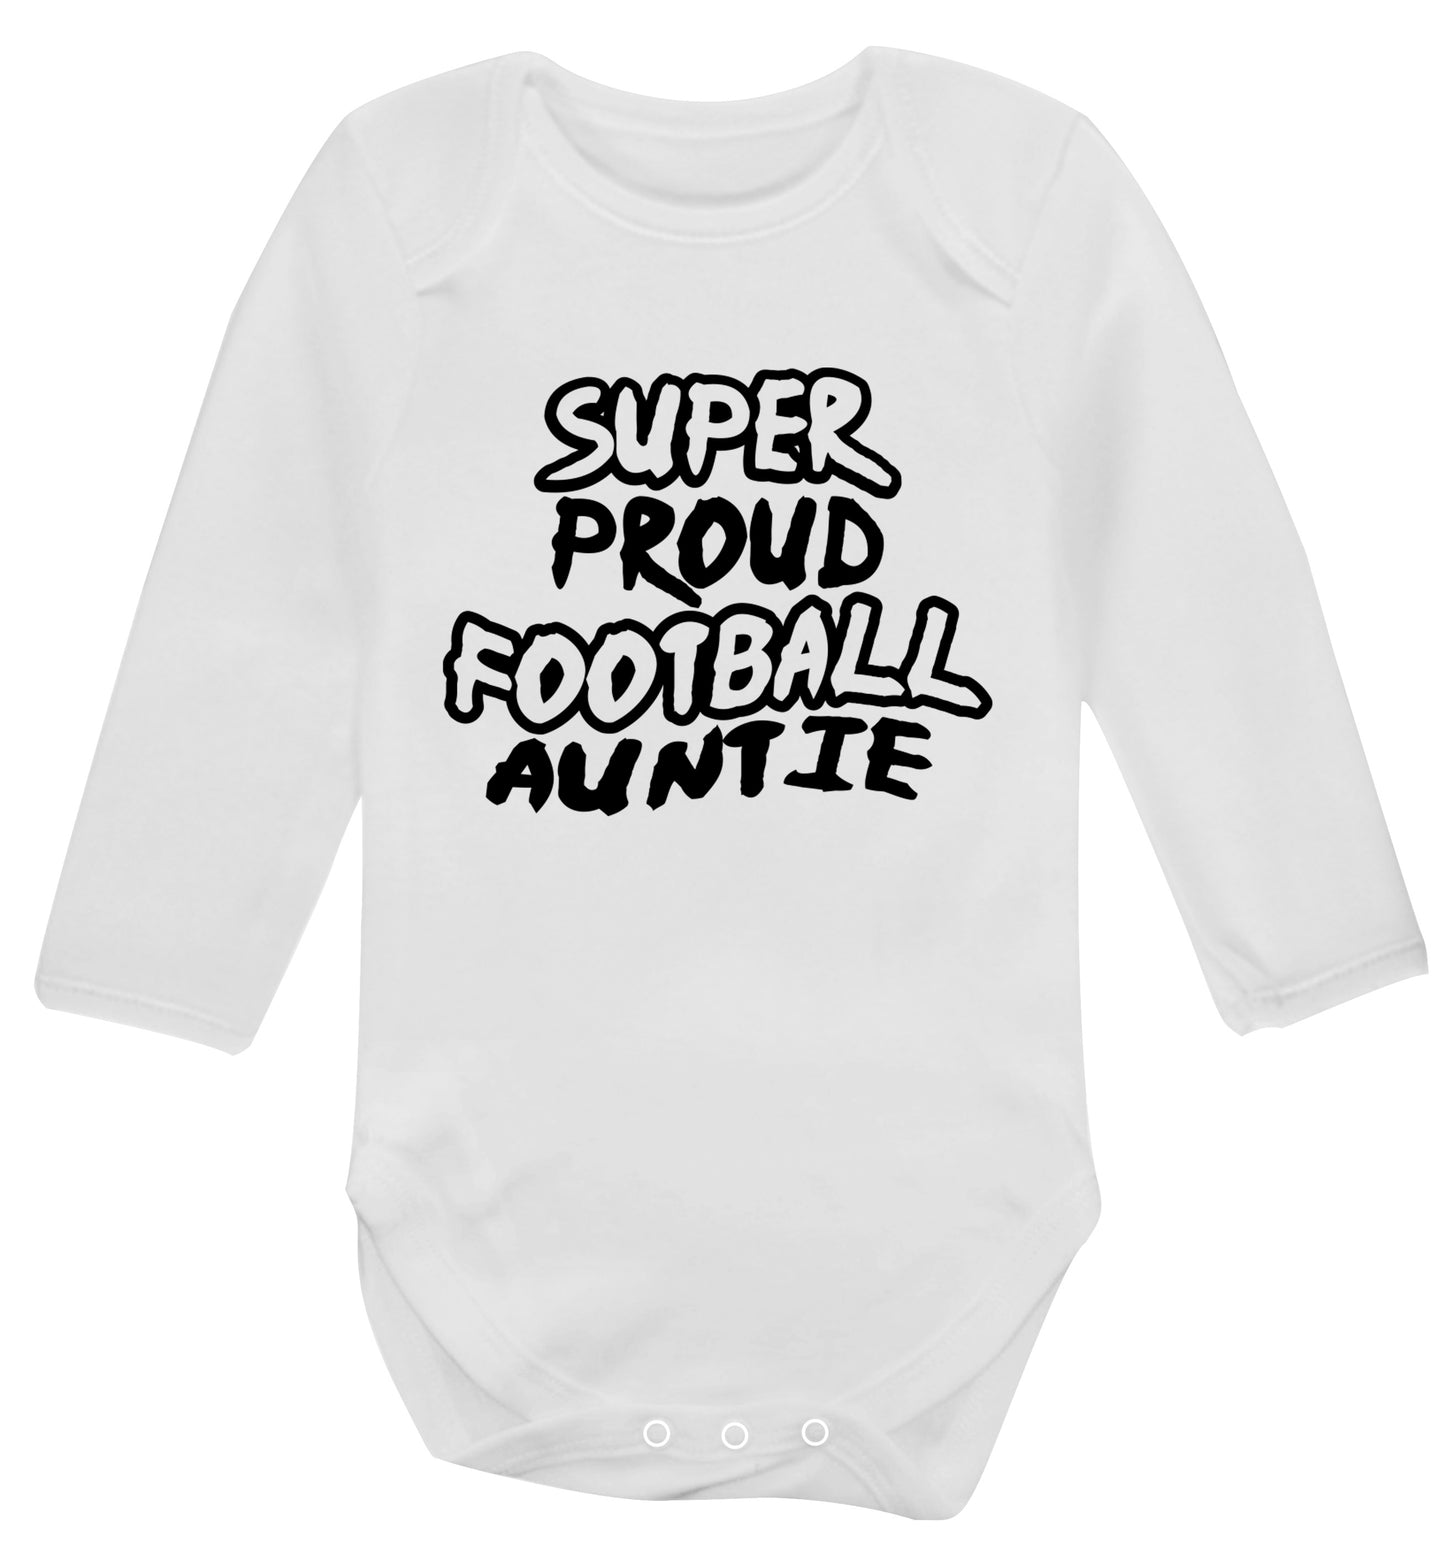 Super proud football auntie Baby Vest long sleeved white 6-12 months